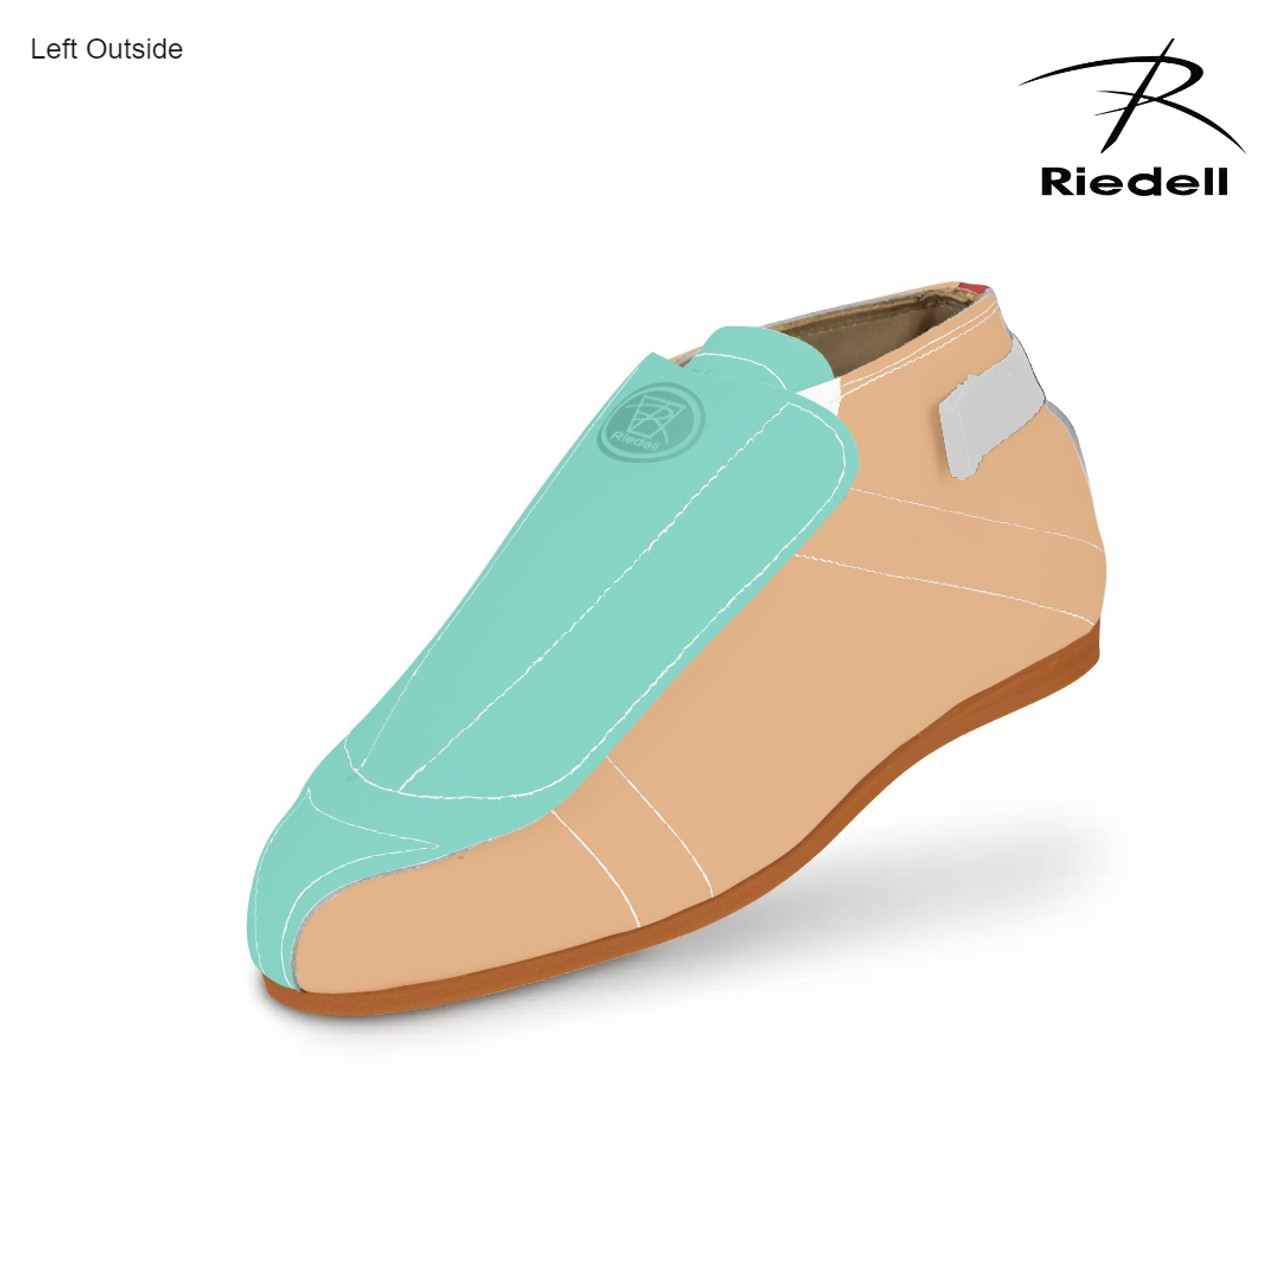 Riedell 395 Boot | Jam or Speed Skating